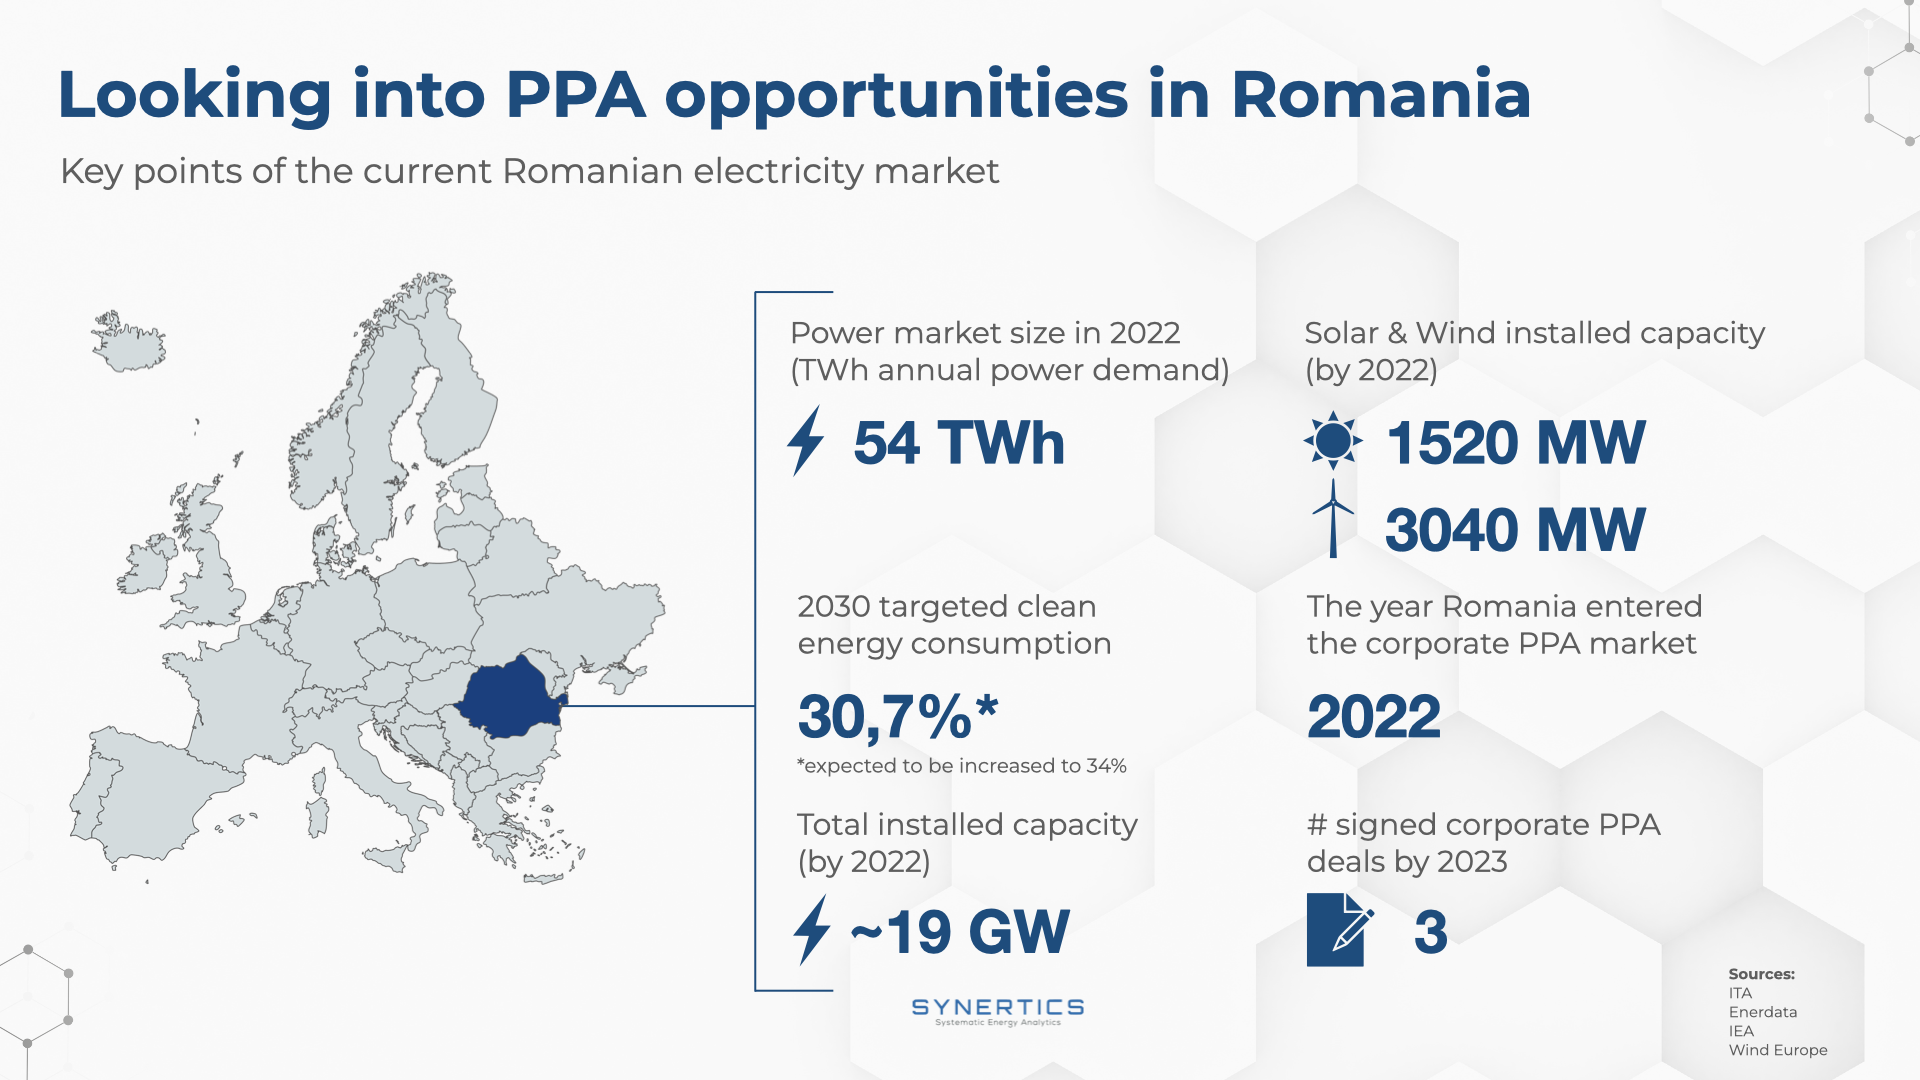 Looking into PPA opportunities in Romania - key points